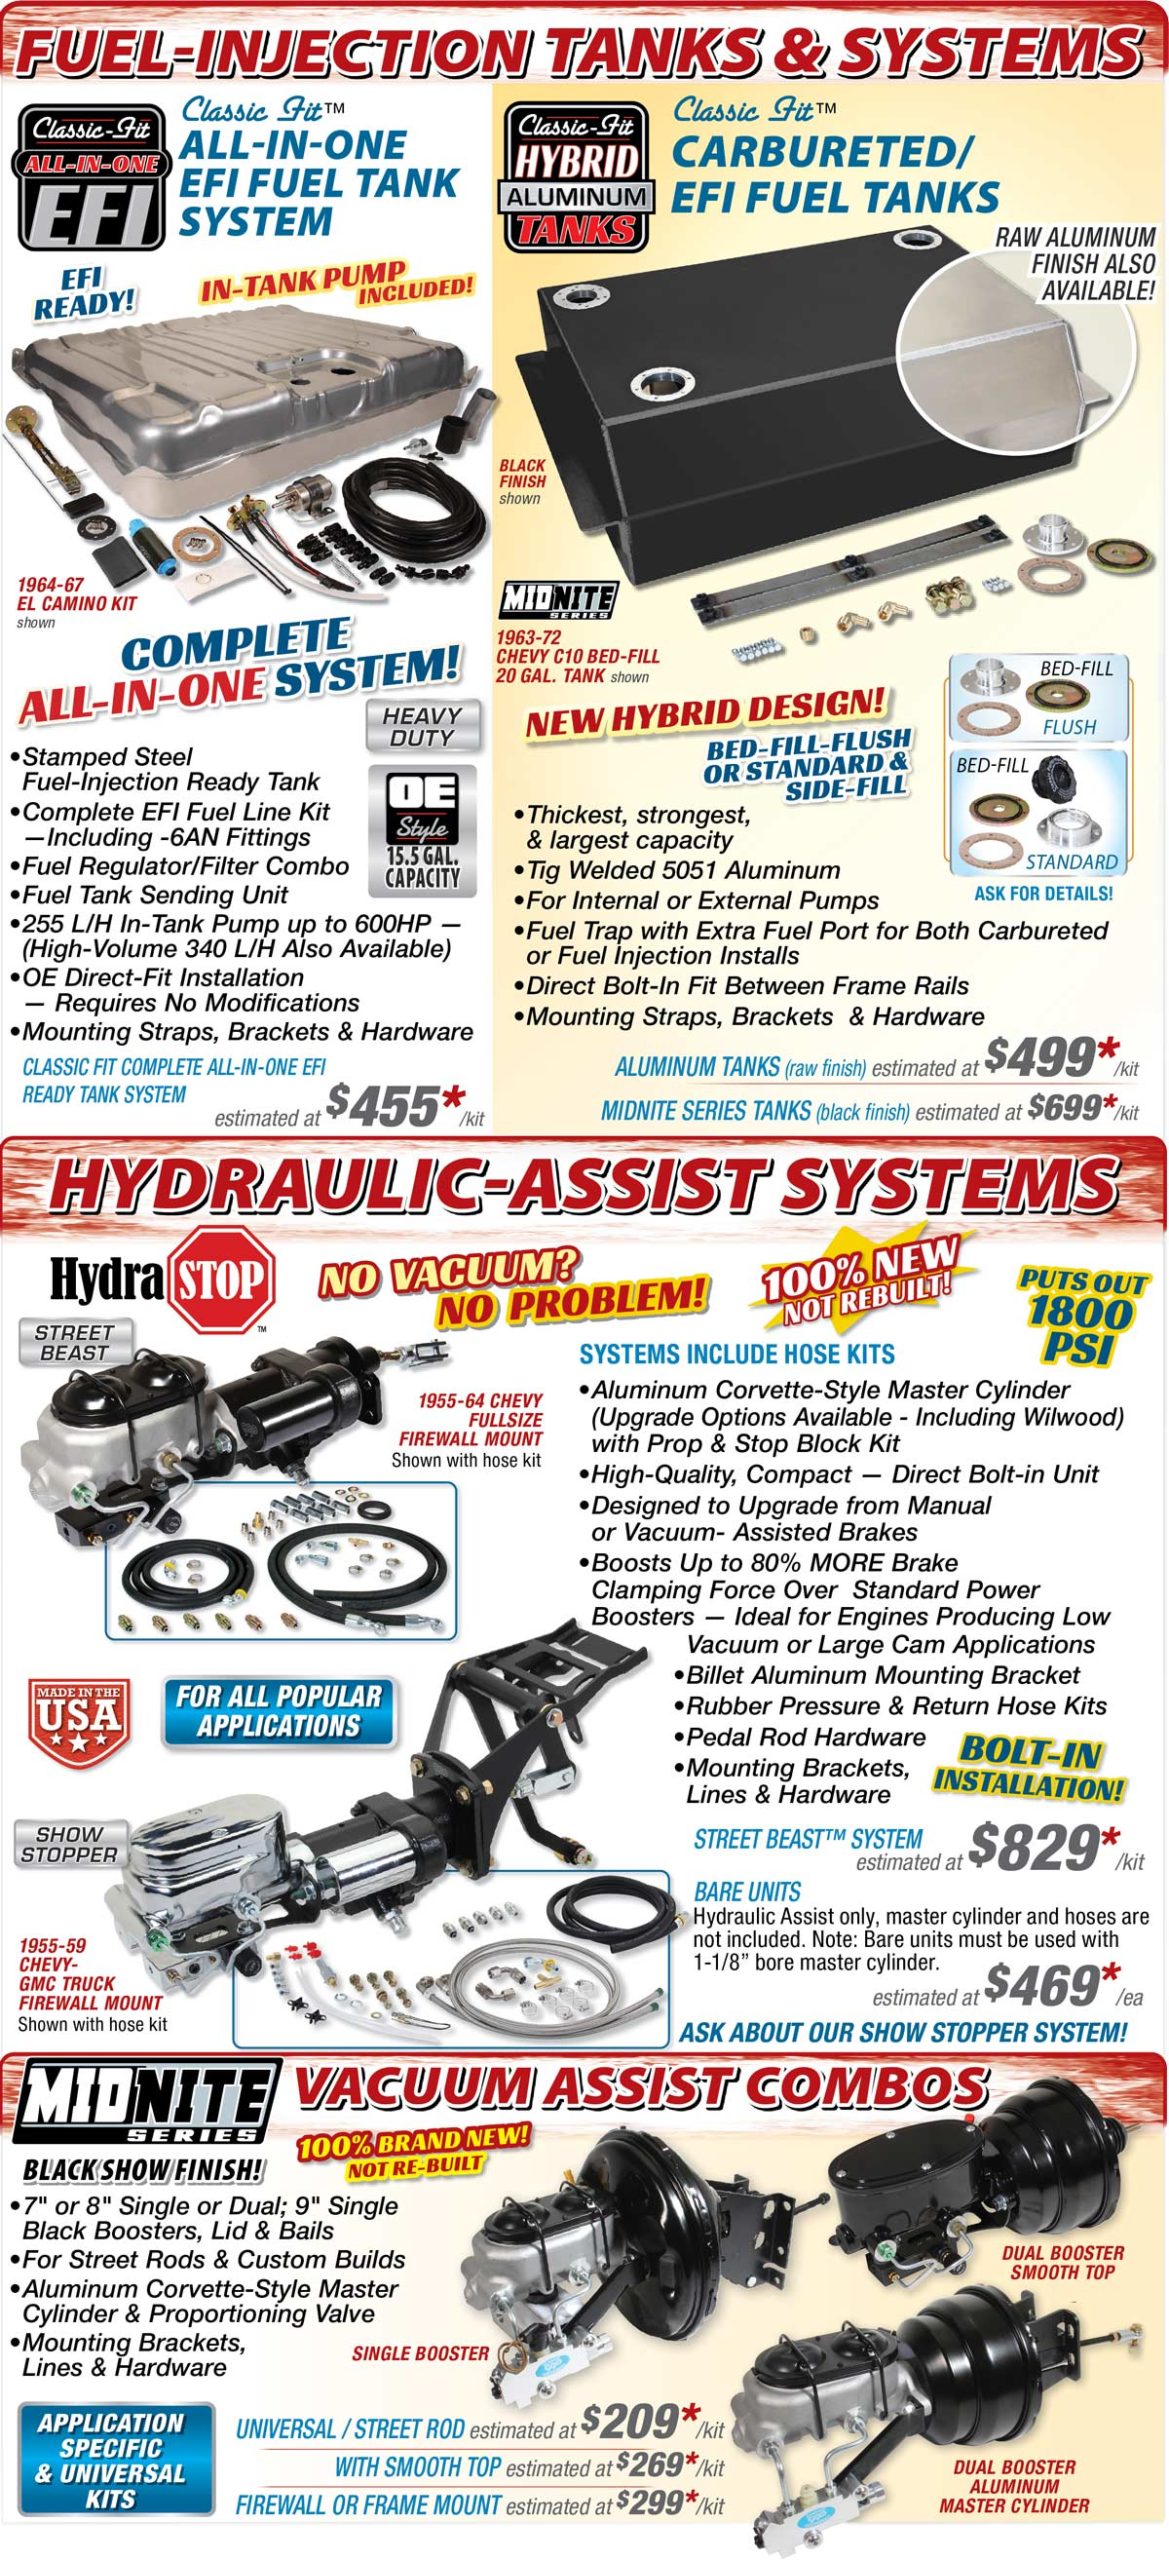 Fuel-Injection Tanks & Systems, Hydraulic-Assist Systems